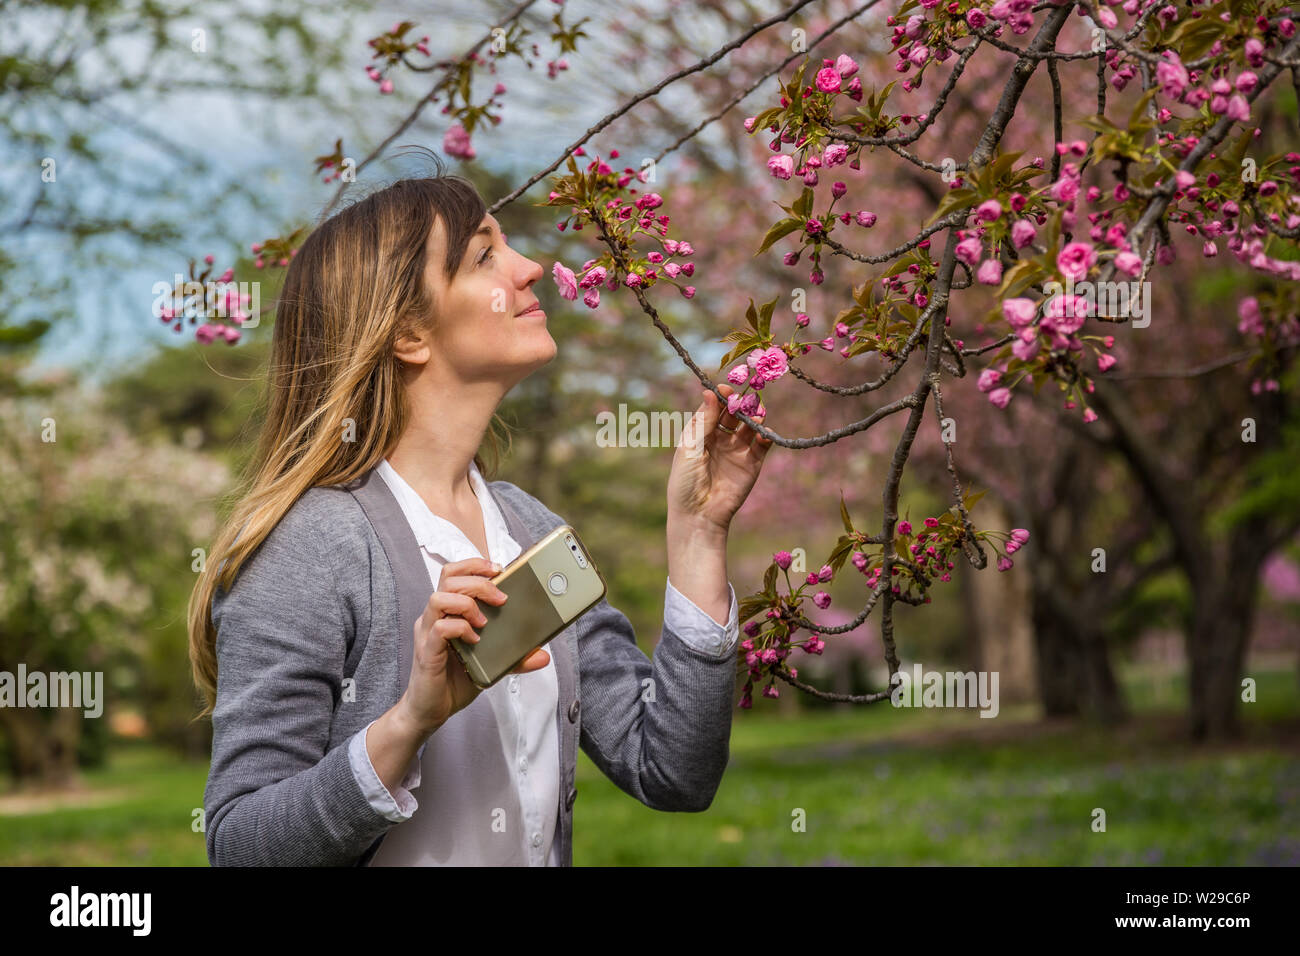 Woman photographing pink cherry blossom on a tree. Stock Photo